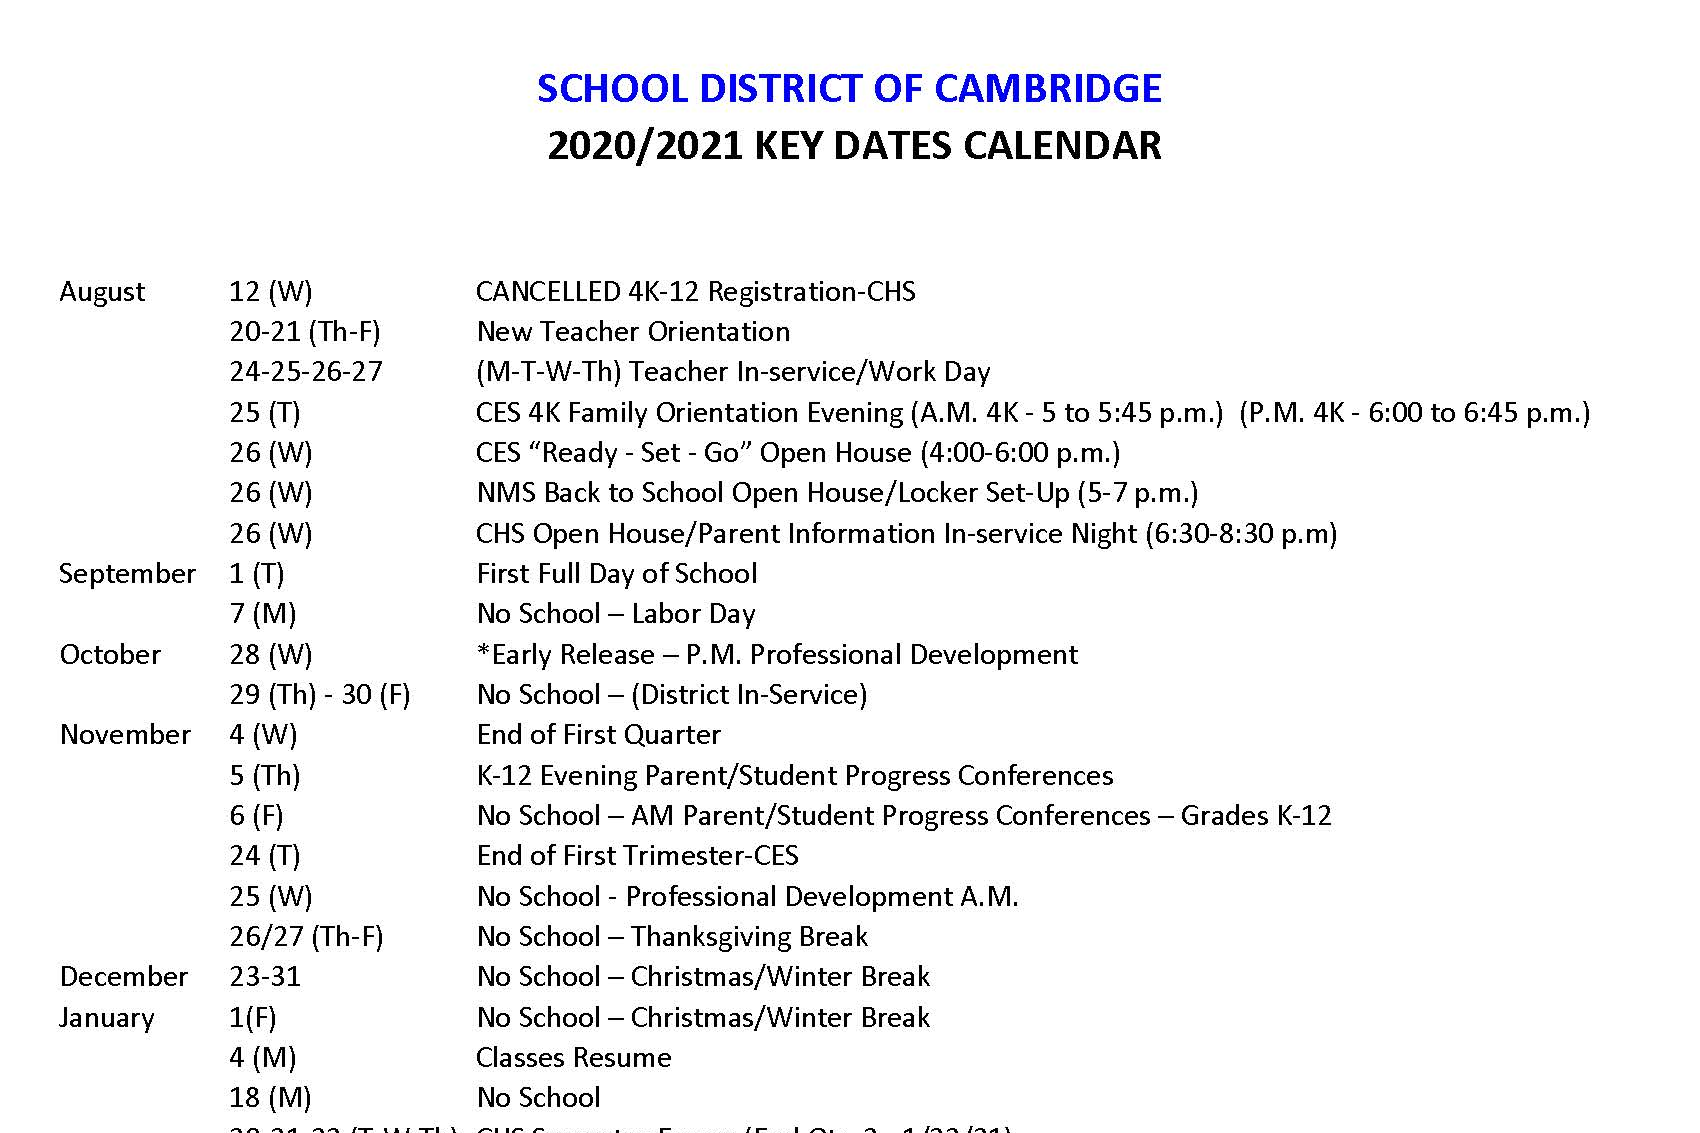 School District of Cambridge Learn from the past, Achieve in the